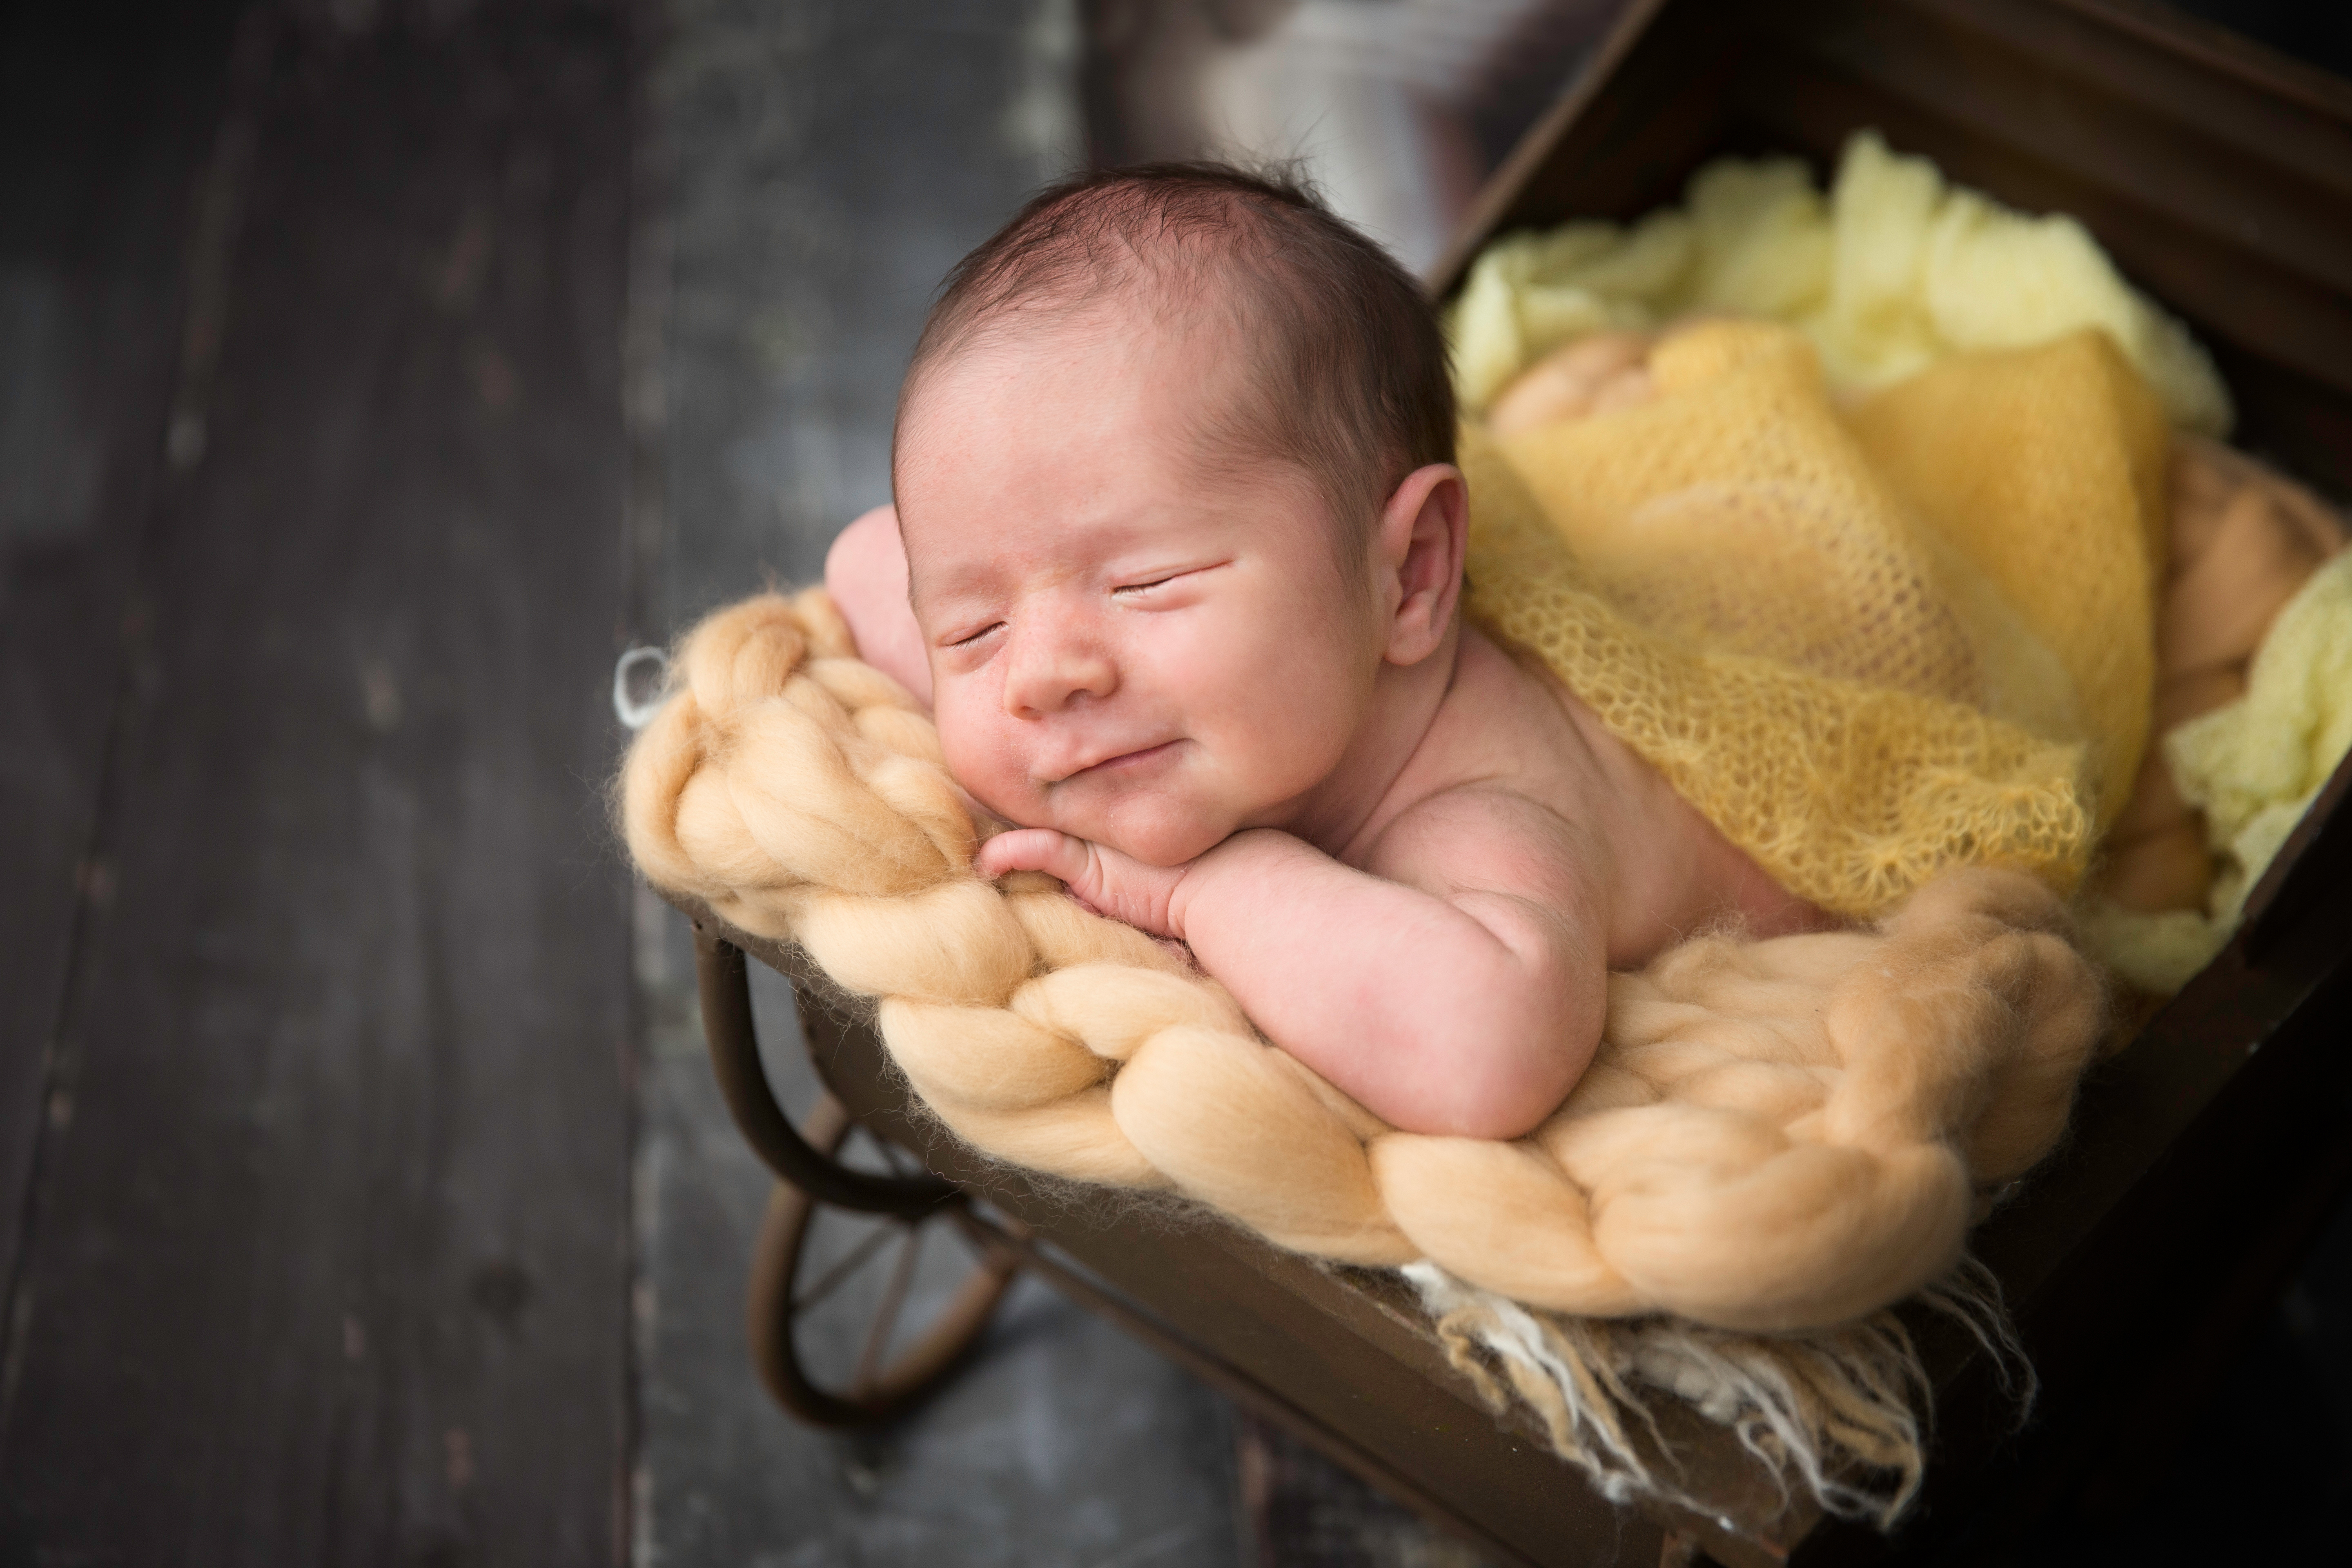 Newborn Photography Oldwick NJ - Forget about the frowns - on the contrary, we got several smiles from this cutie pie